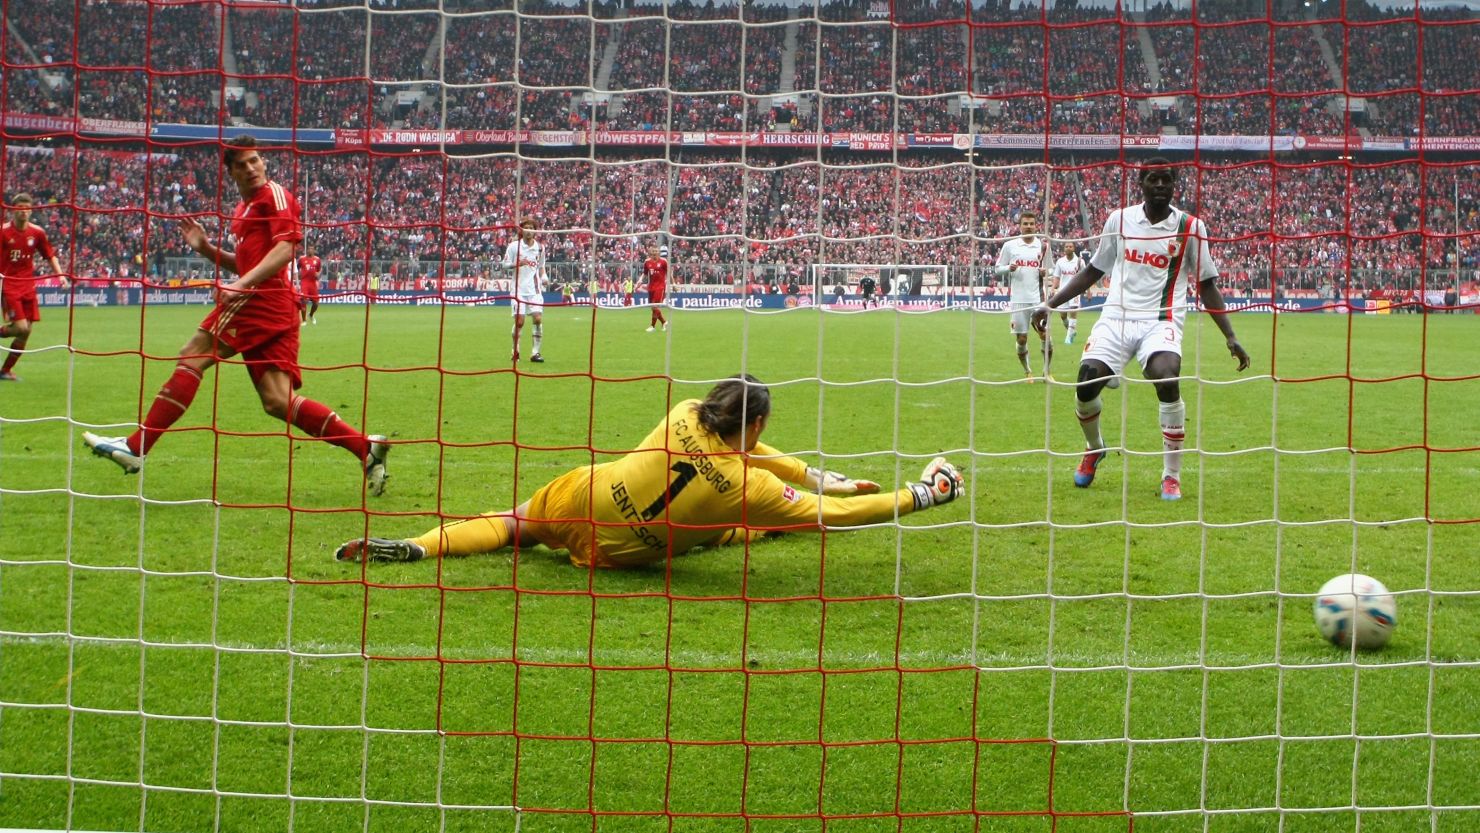 Mario Gomez (left) slots home his second goal in the 2-1 win over Augsburg in the Bundesliga on Saturday 